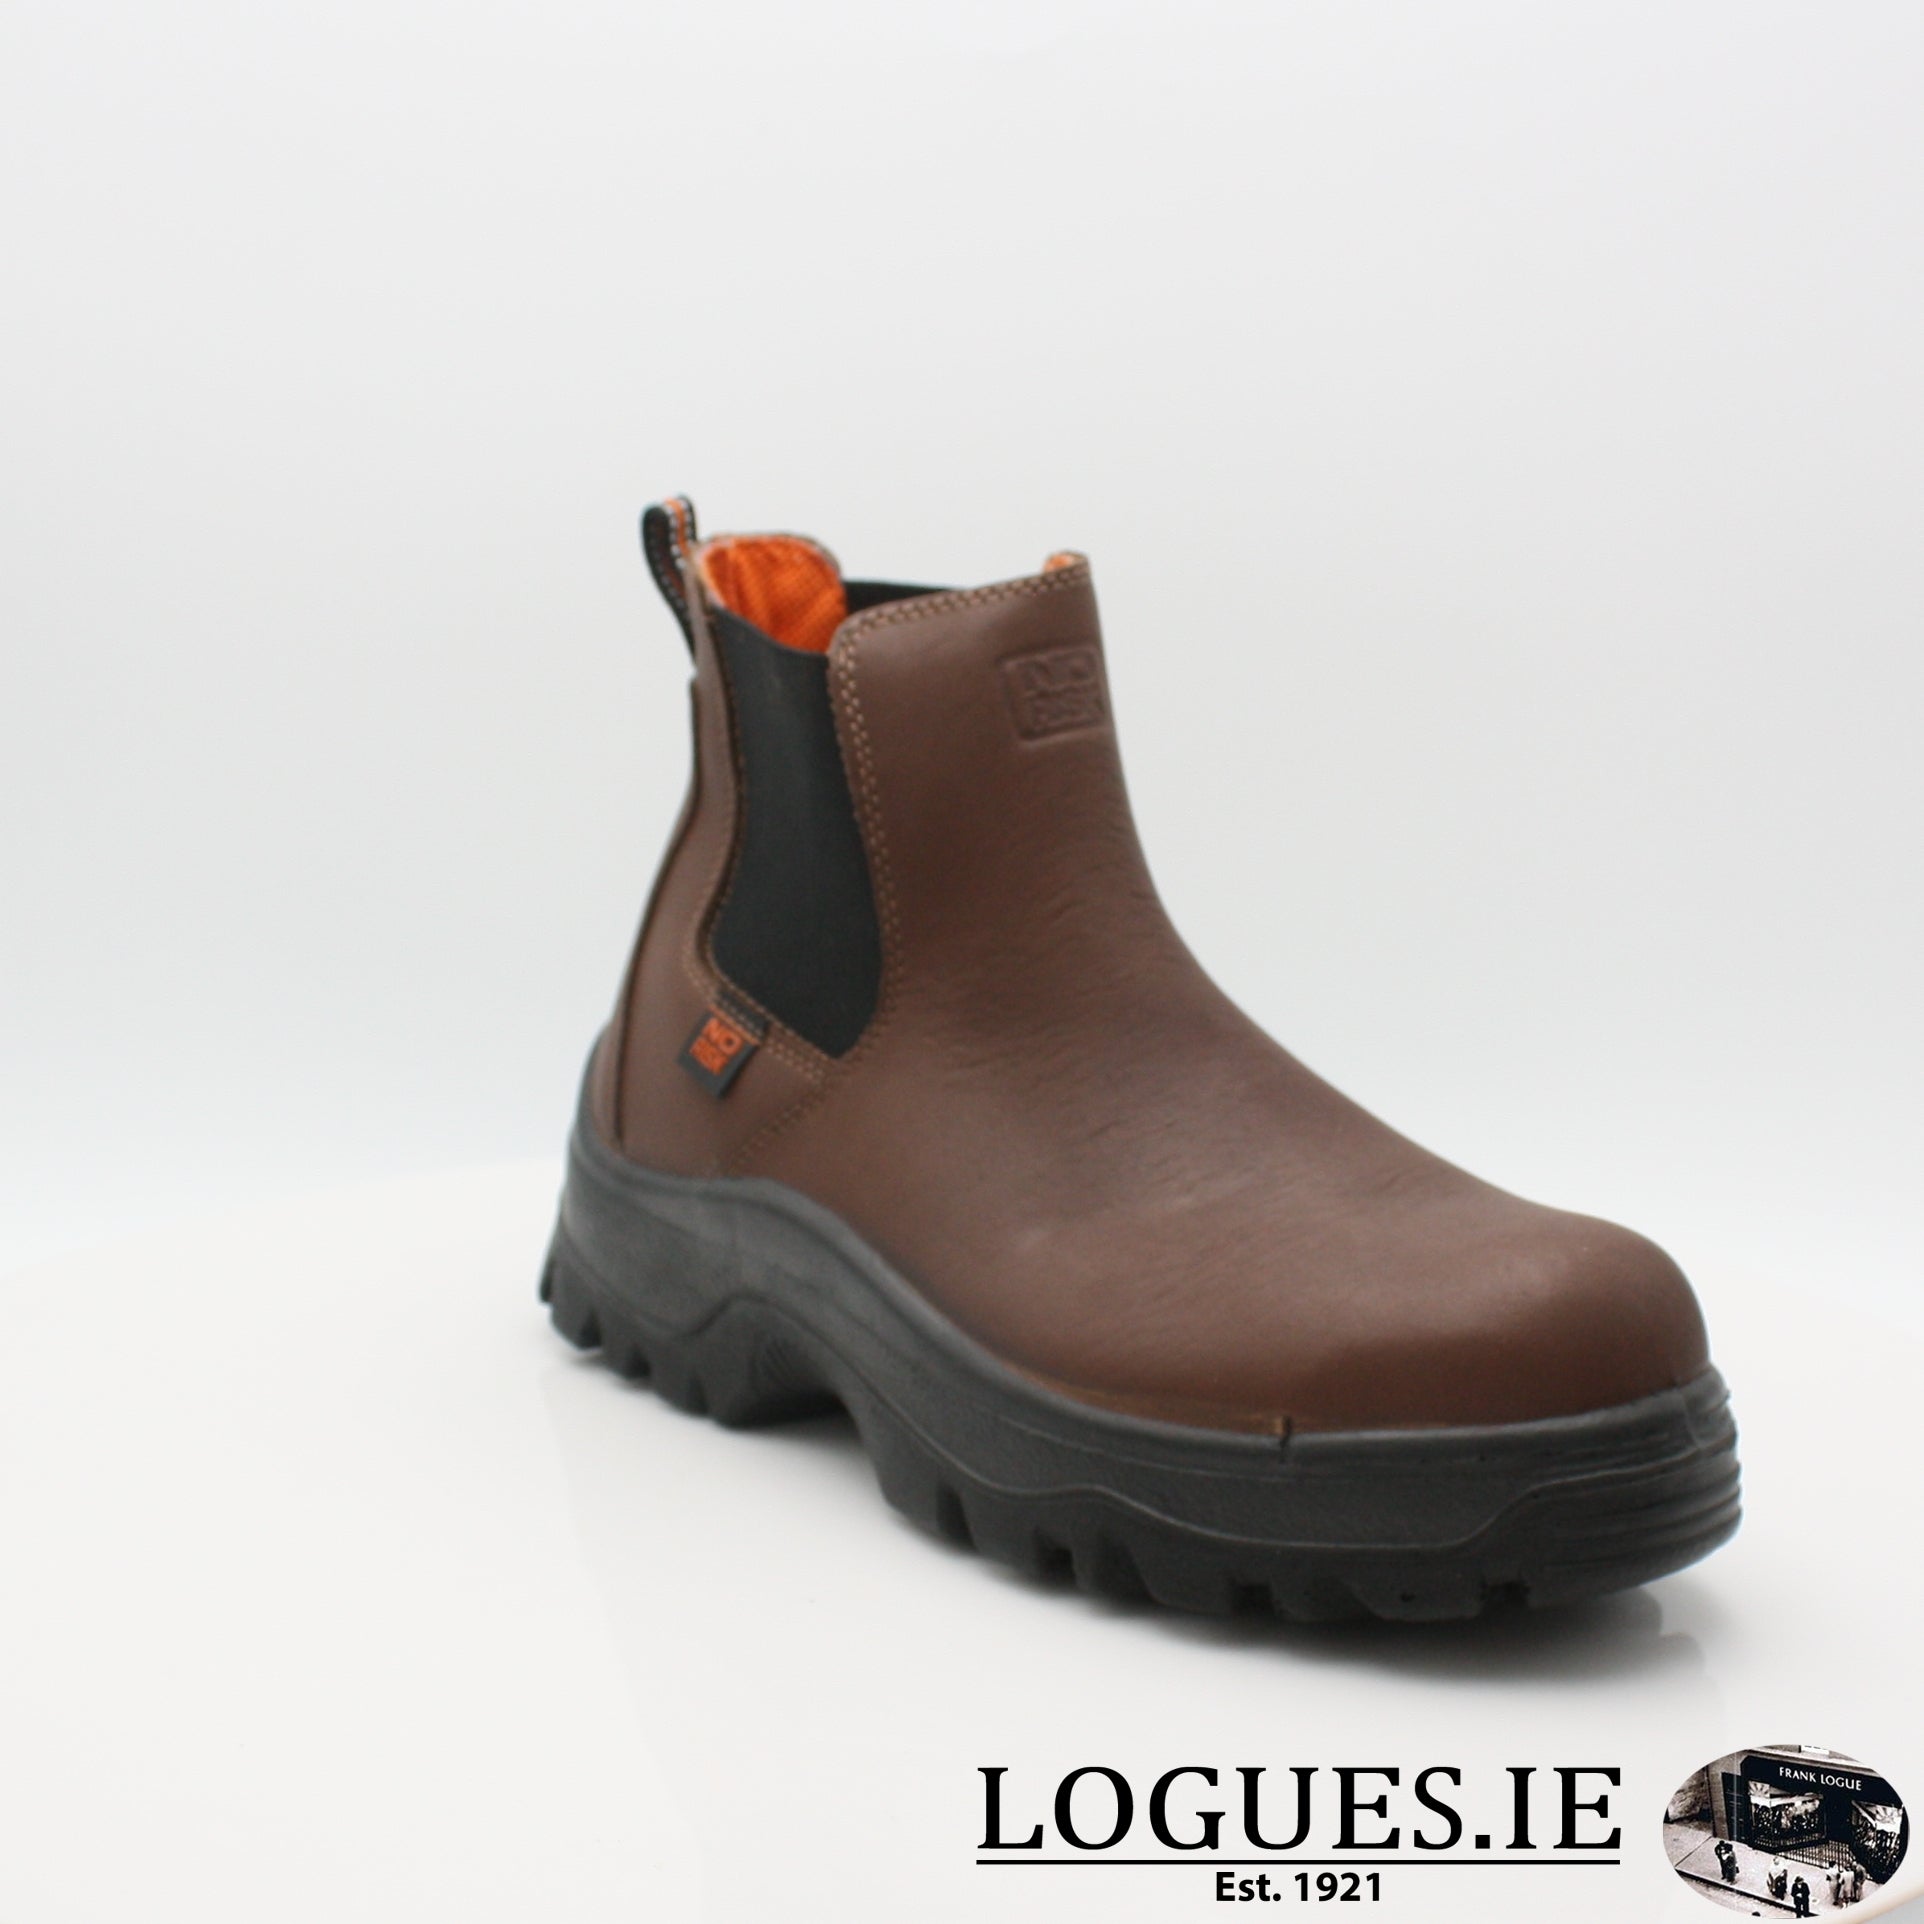 no risk safety boots ireland